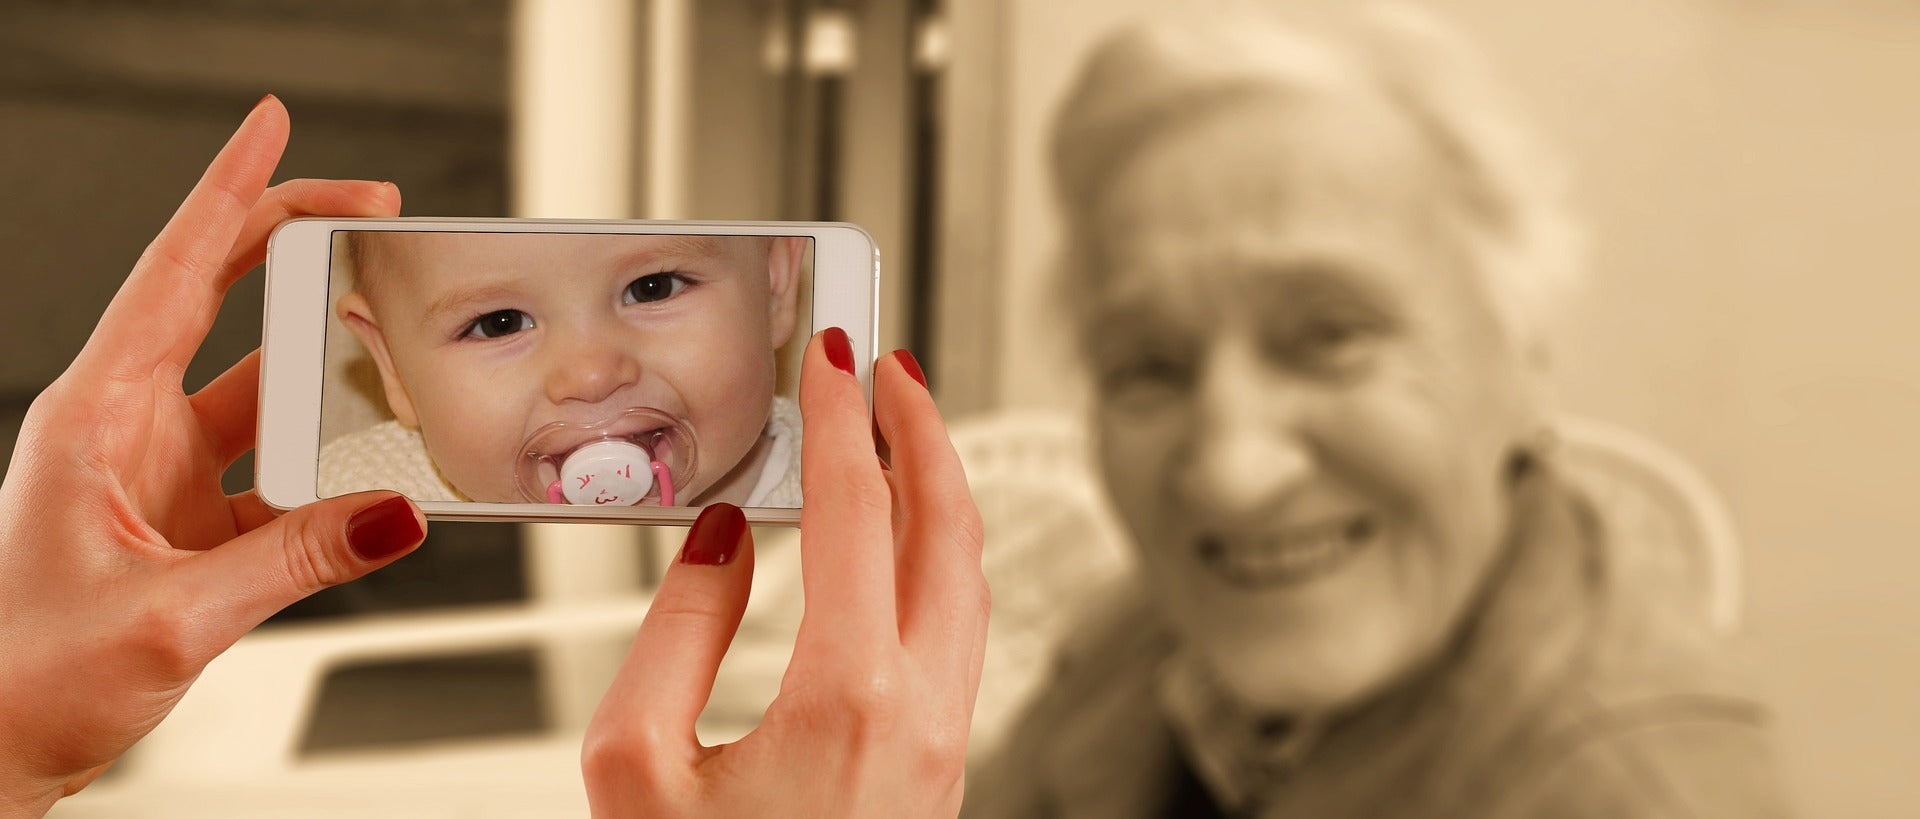 An image of a baby and a blurred image of an old woman.